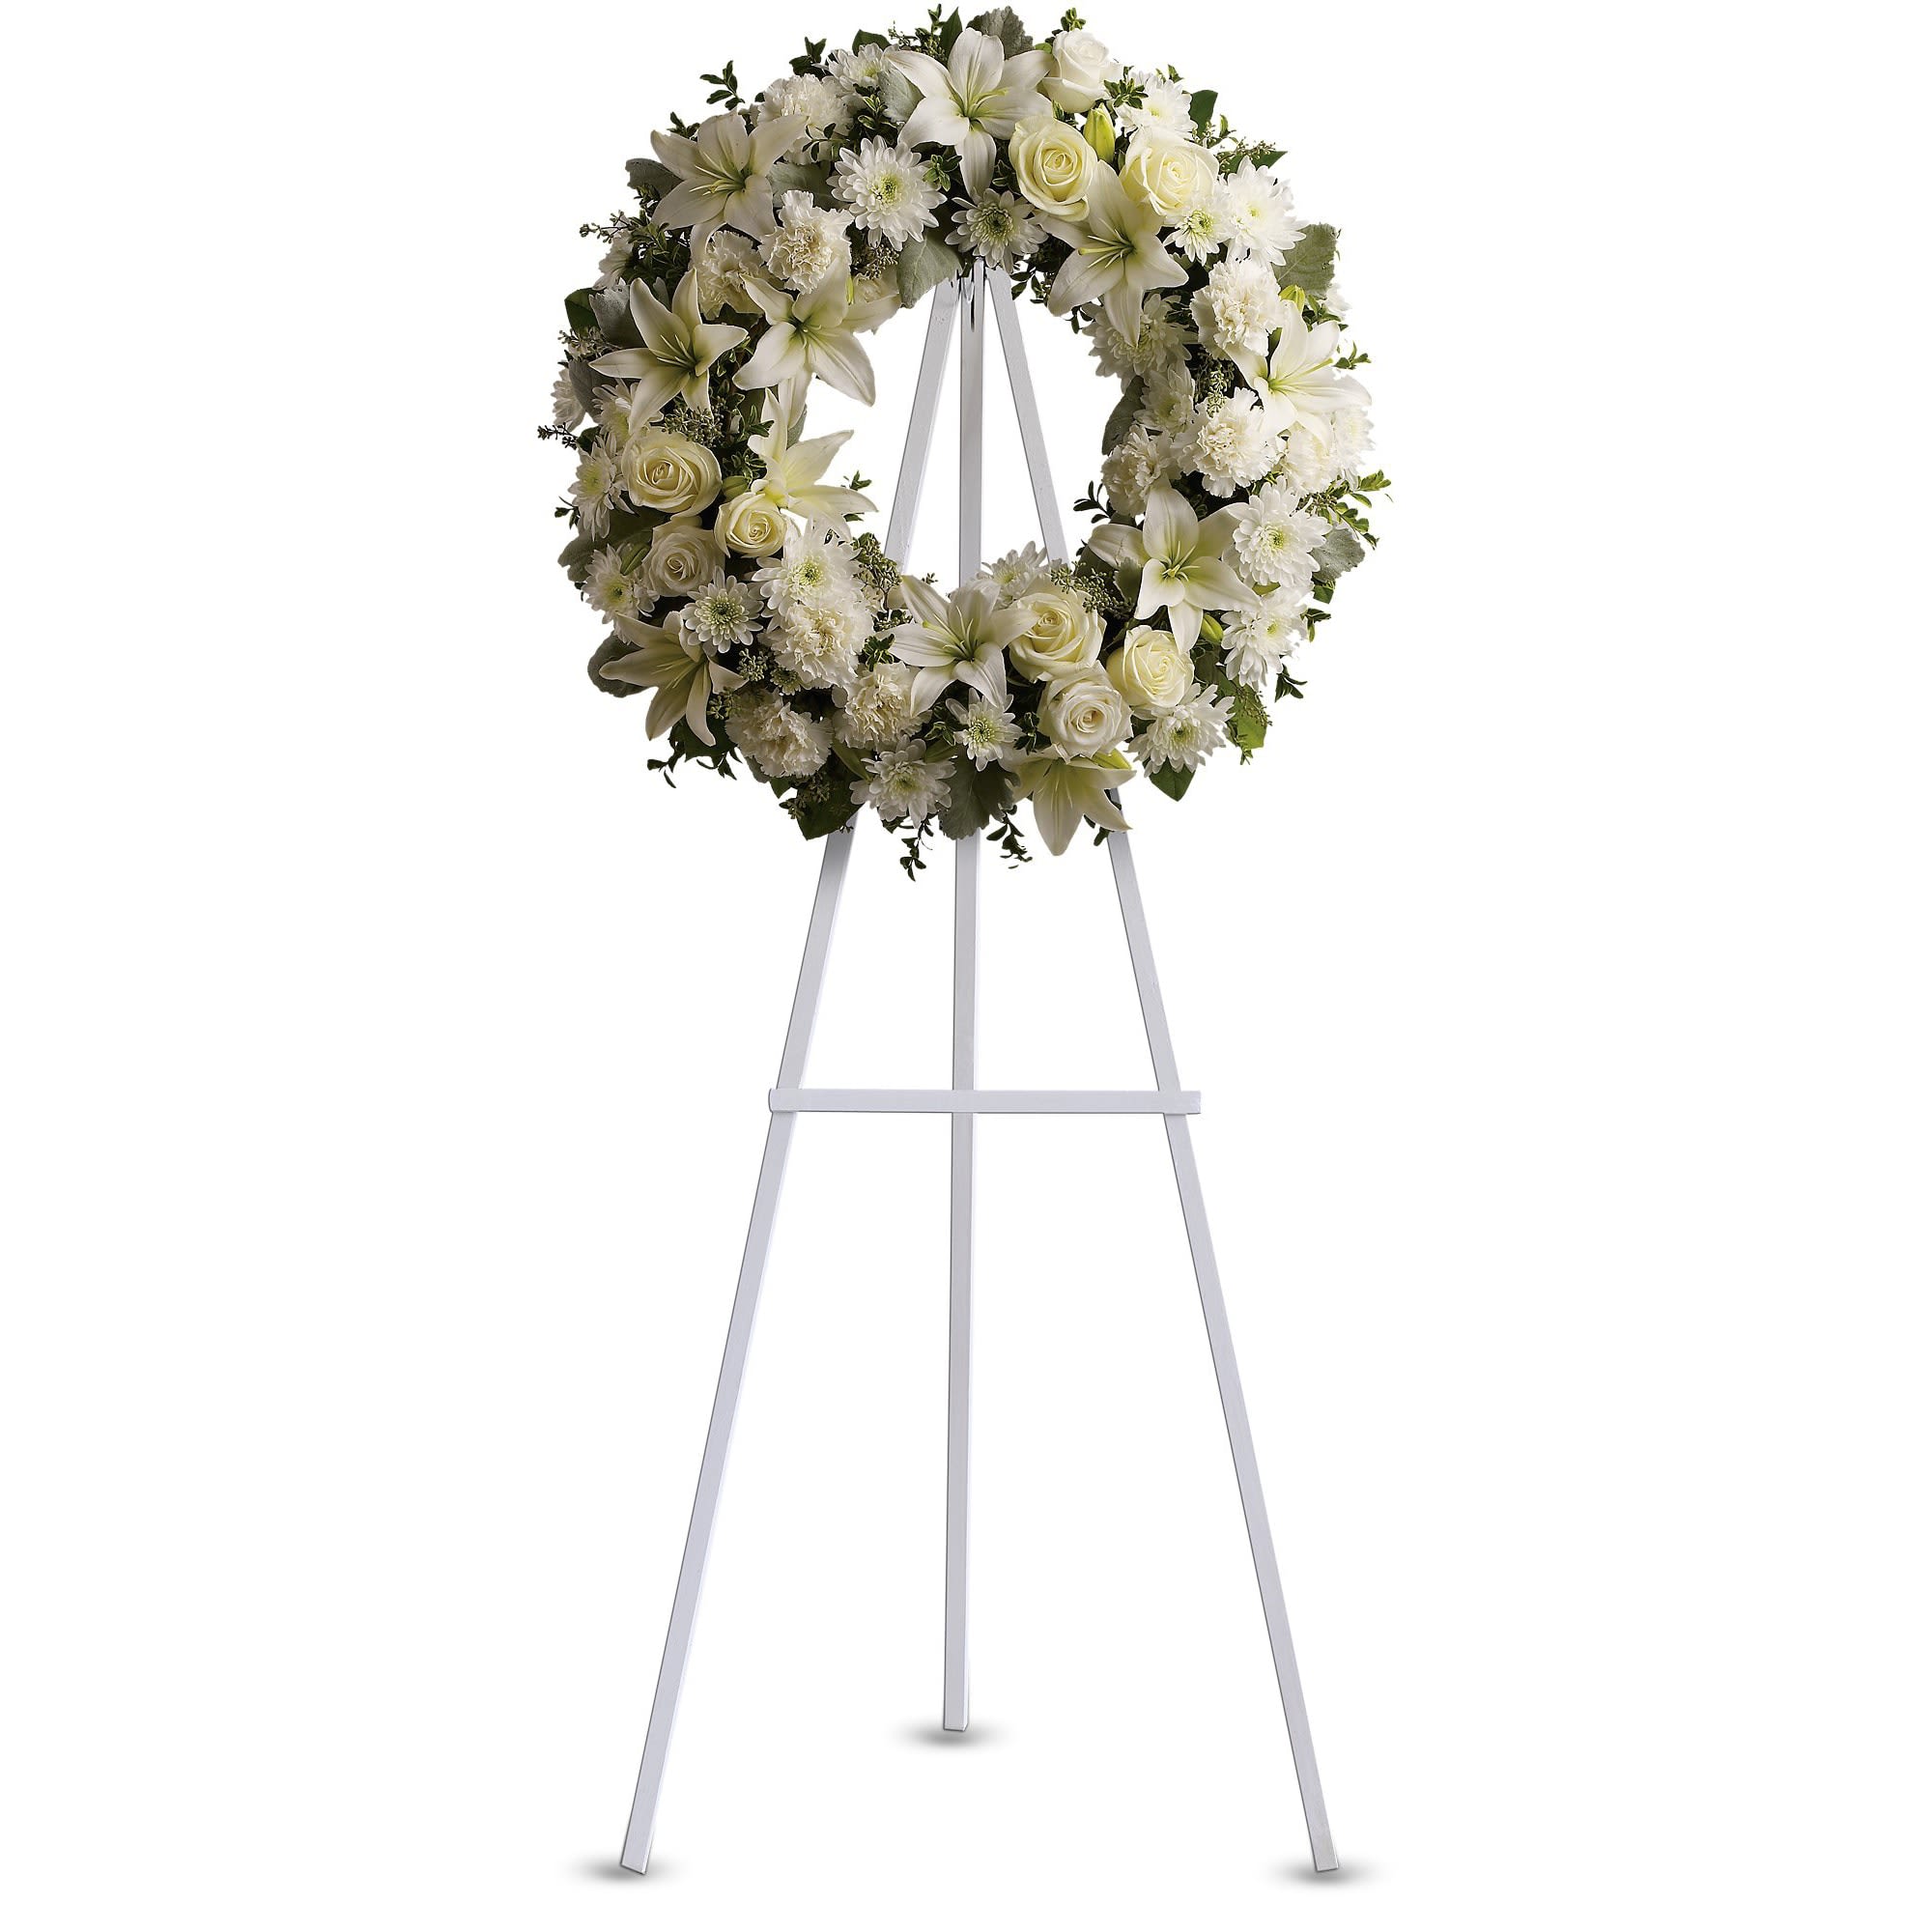 Serenity Wreath by Teleflora - A ring of fragrant, bright white blossoms will create a serene display at any funeral or wake. This classic wreath is delivered on an easel, and is a thoughtful expression of sympathy and admiration. 